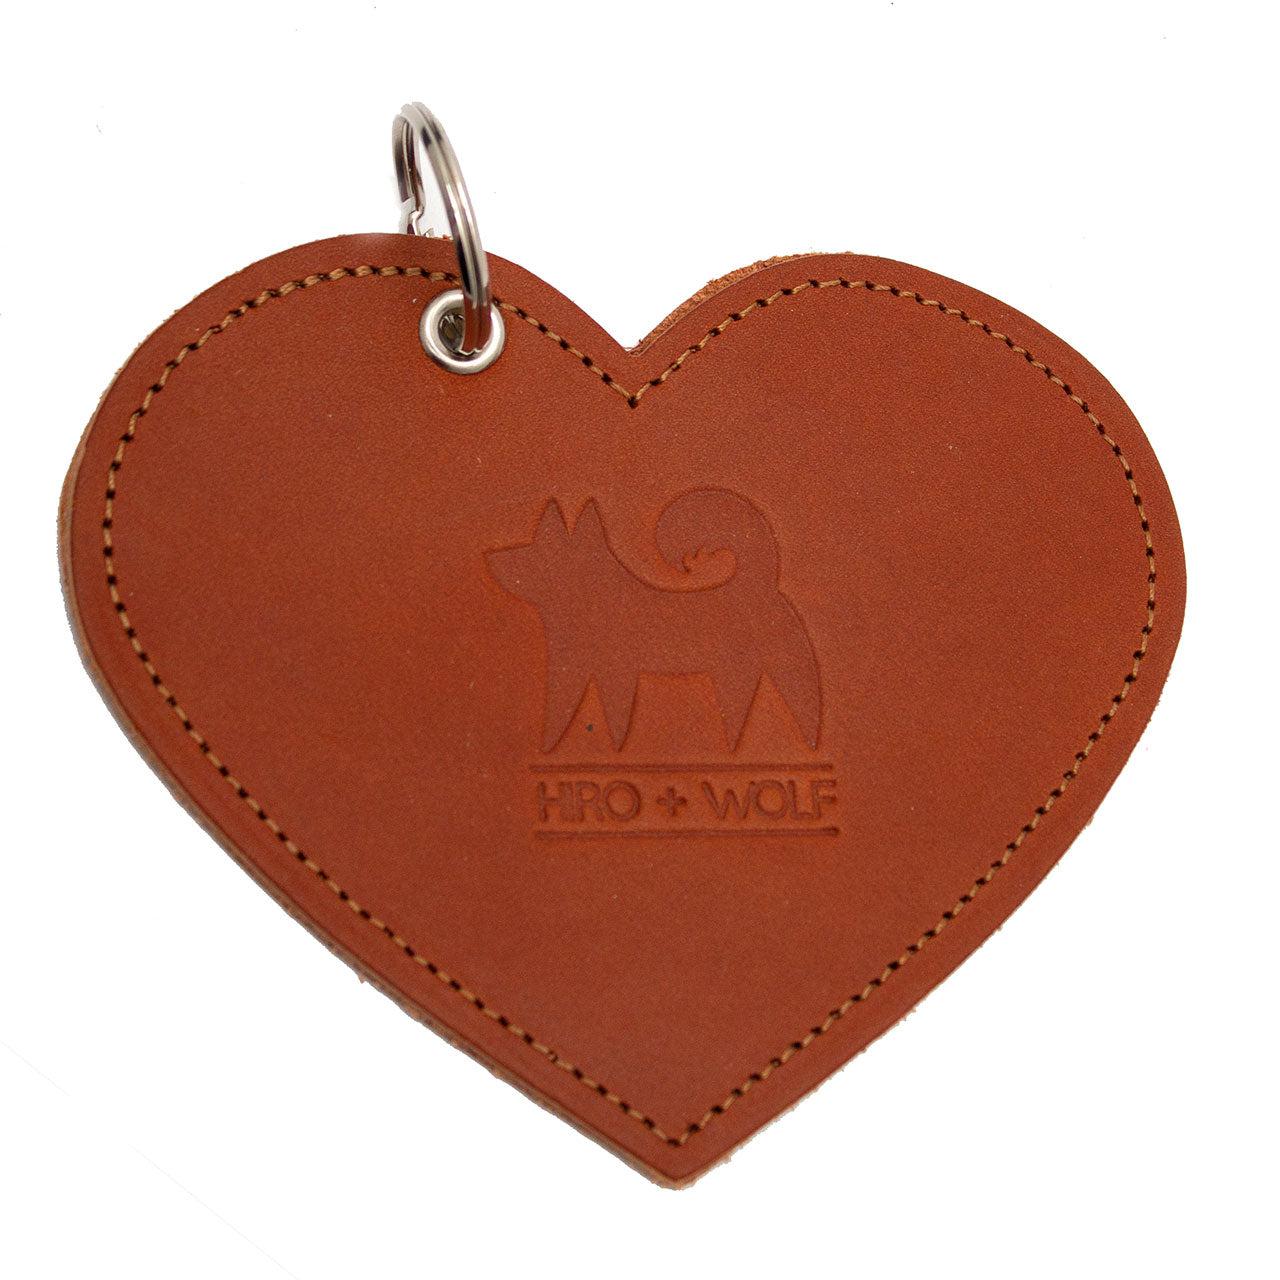 Poo Pouch Heart 'Brown Leather'-Poo Pouch-Hiro + Wolf